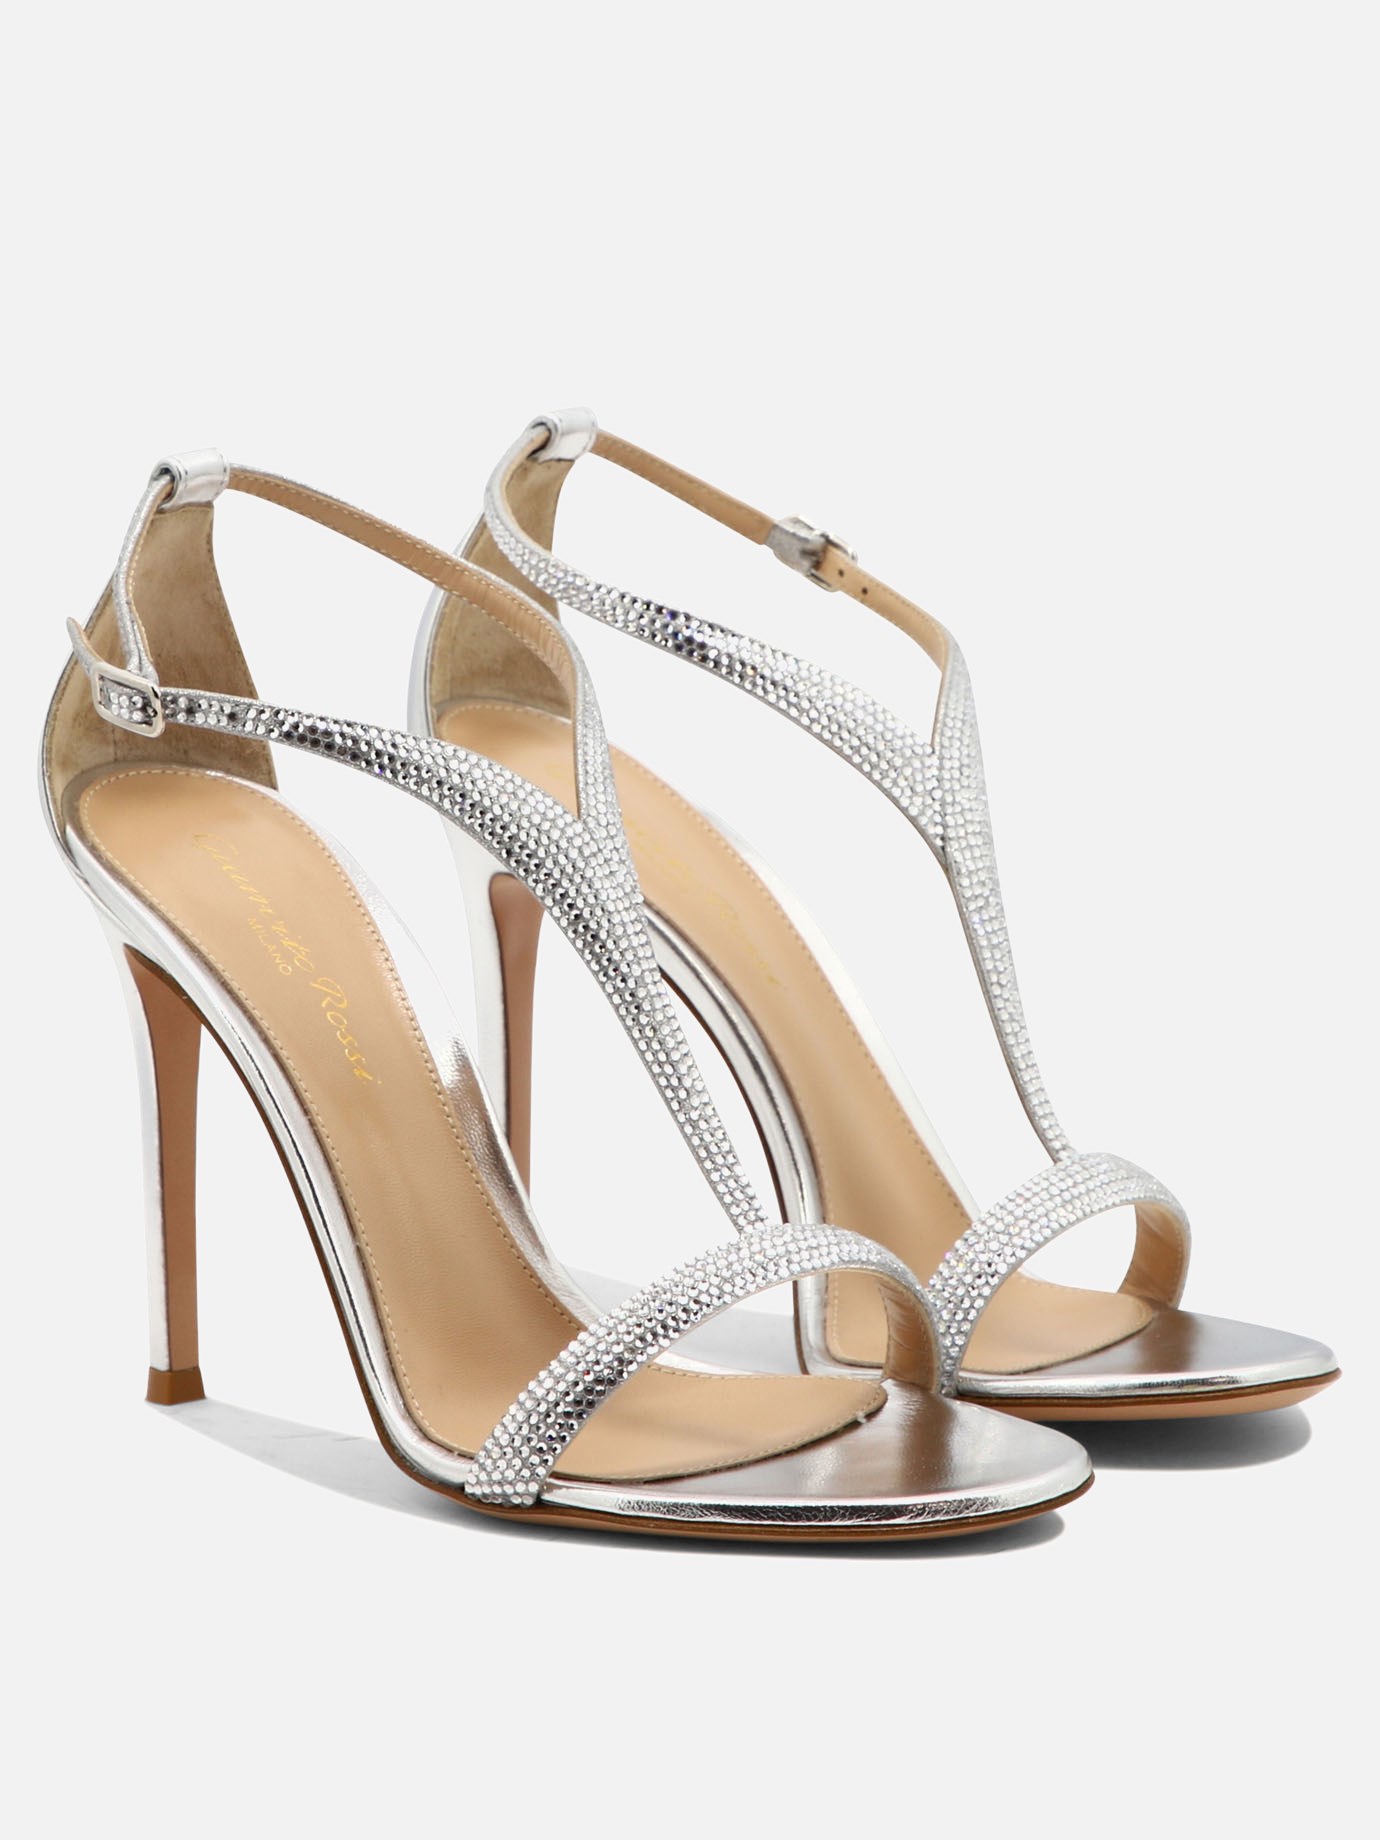 Sandals with crystals by Gianvito Rossi